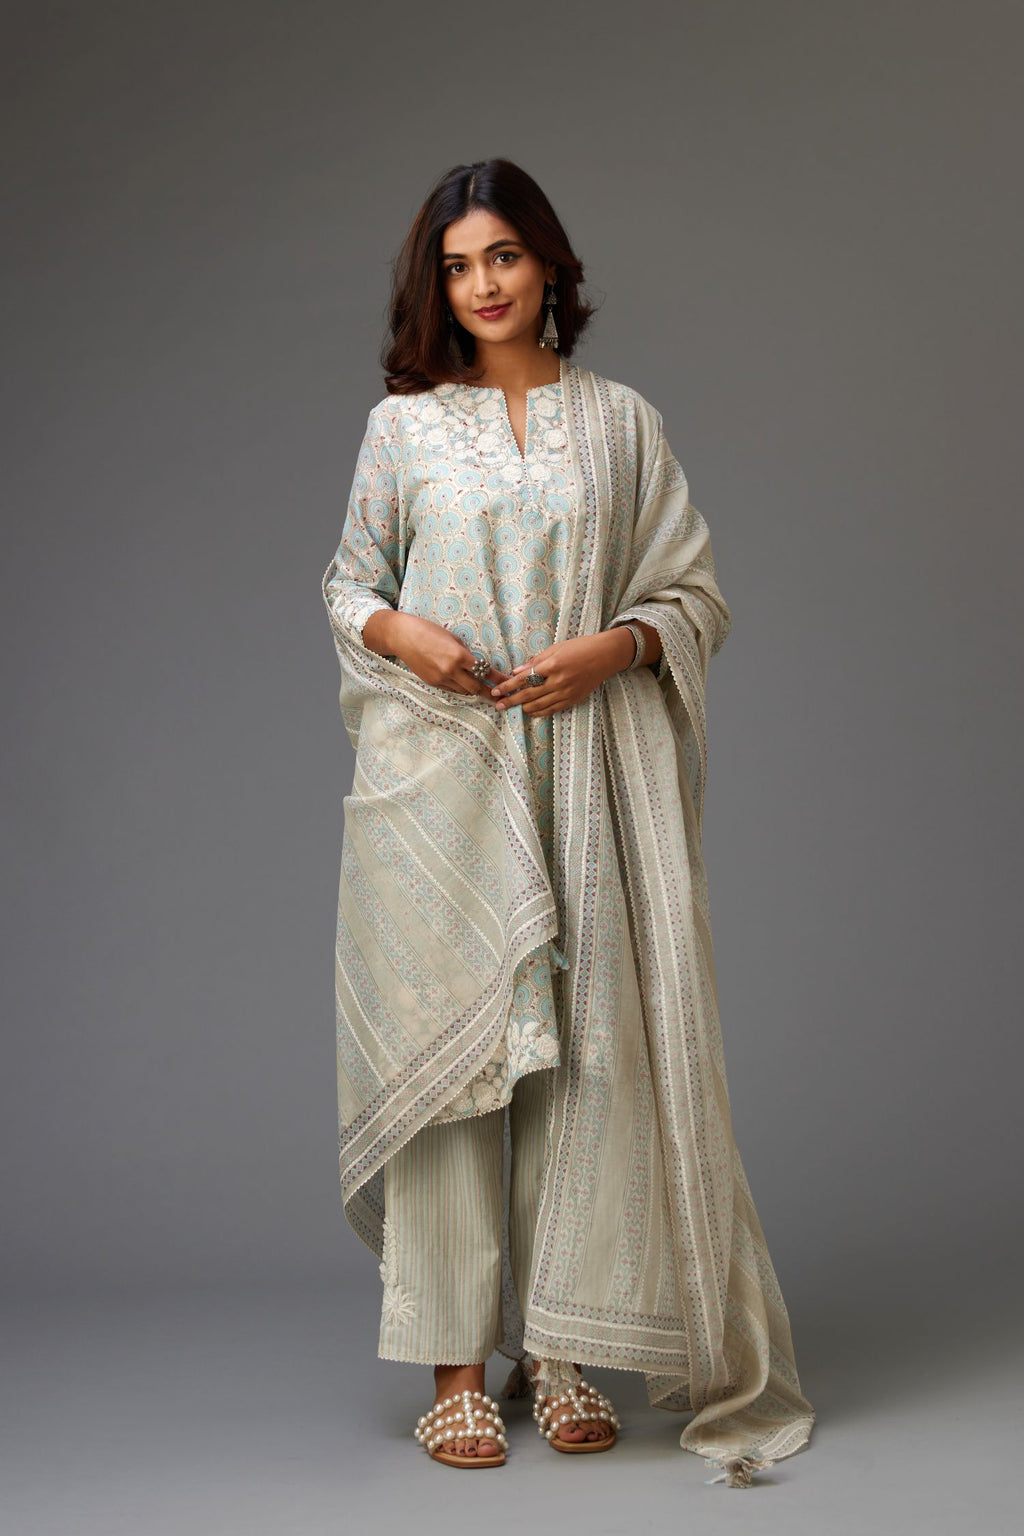 Blue & grey hand block printed Cotton Chanderi dupatta, with embroidery and ric-rac lace.